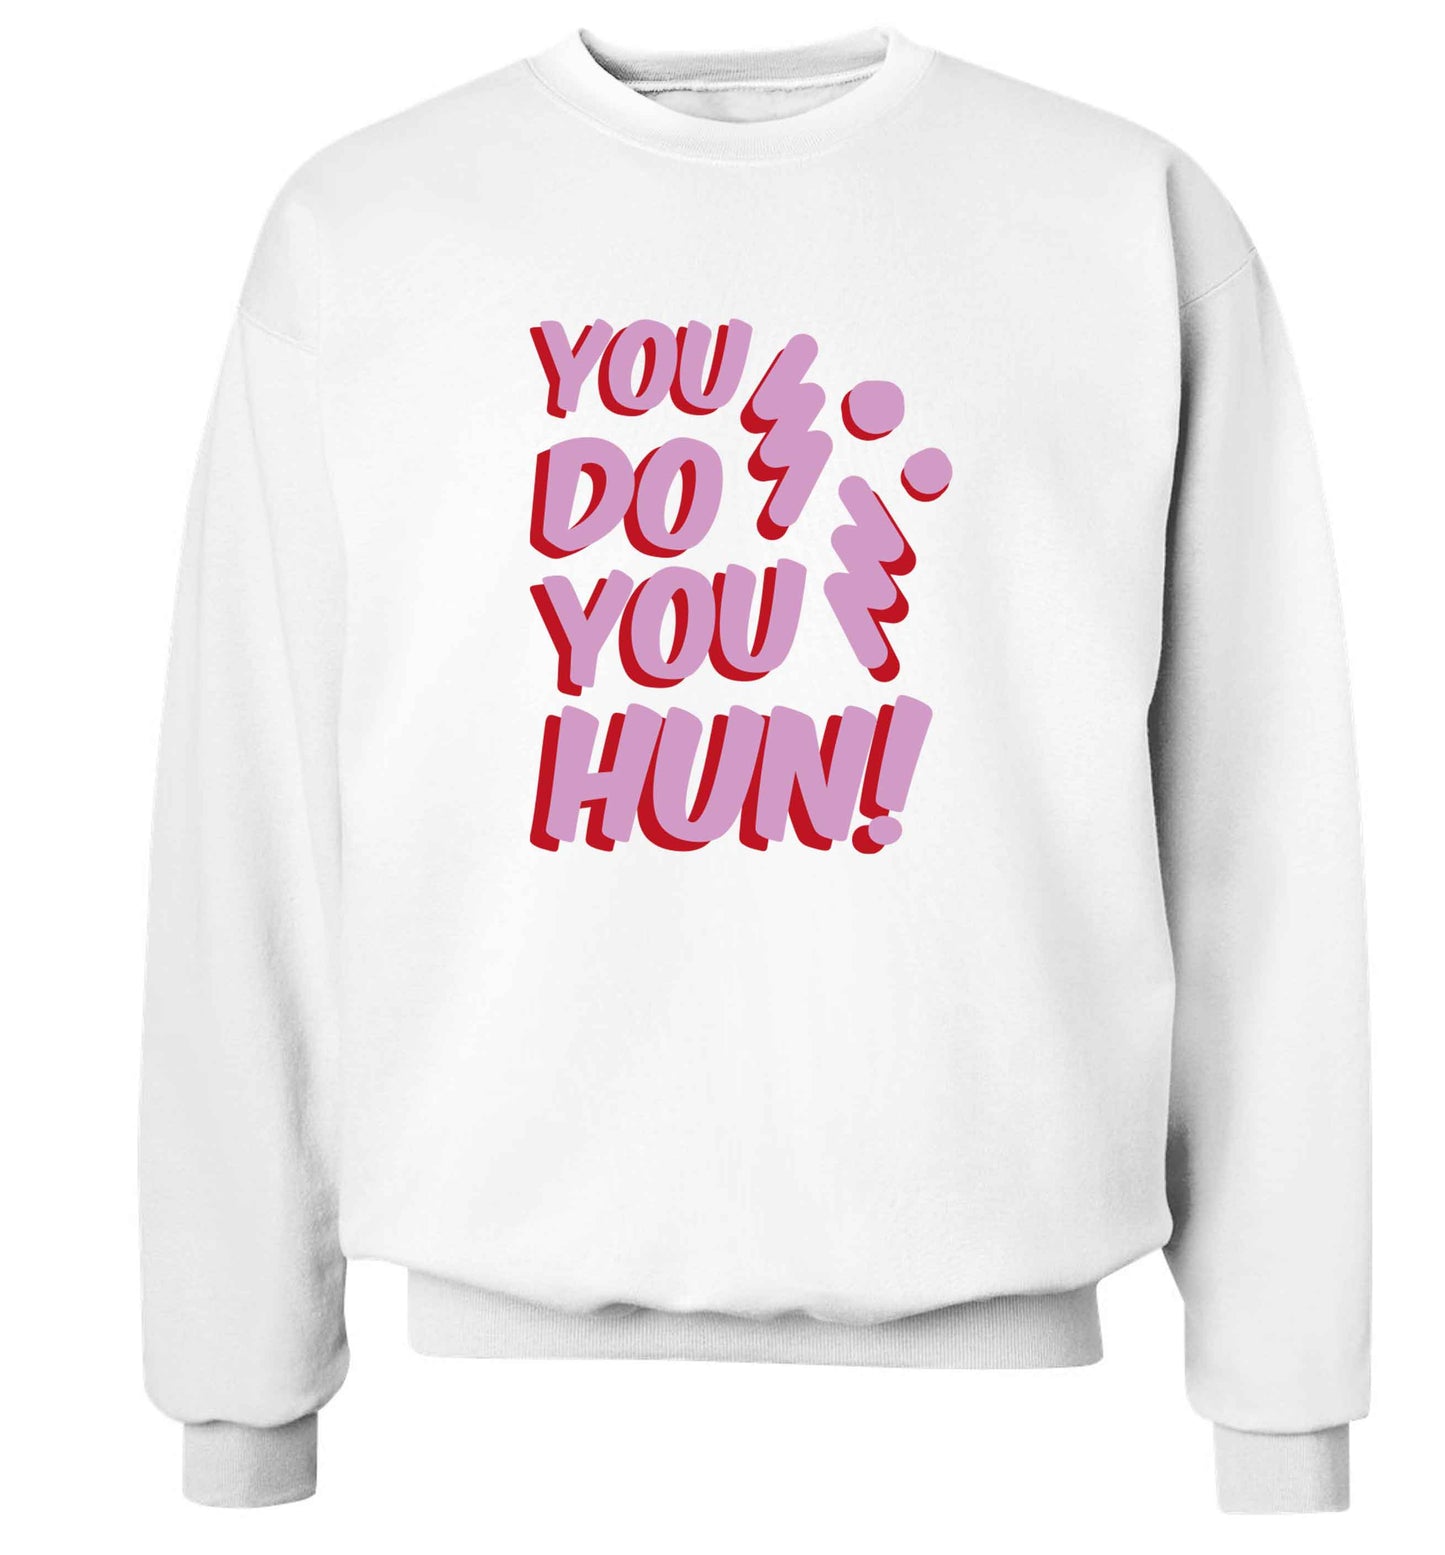 You do you hun adult's unisex white sweater 2XL